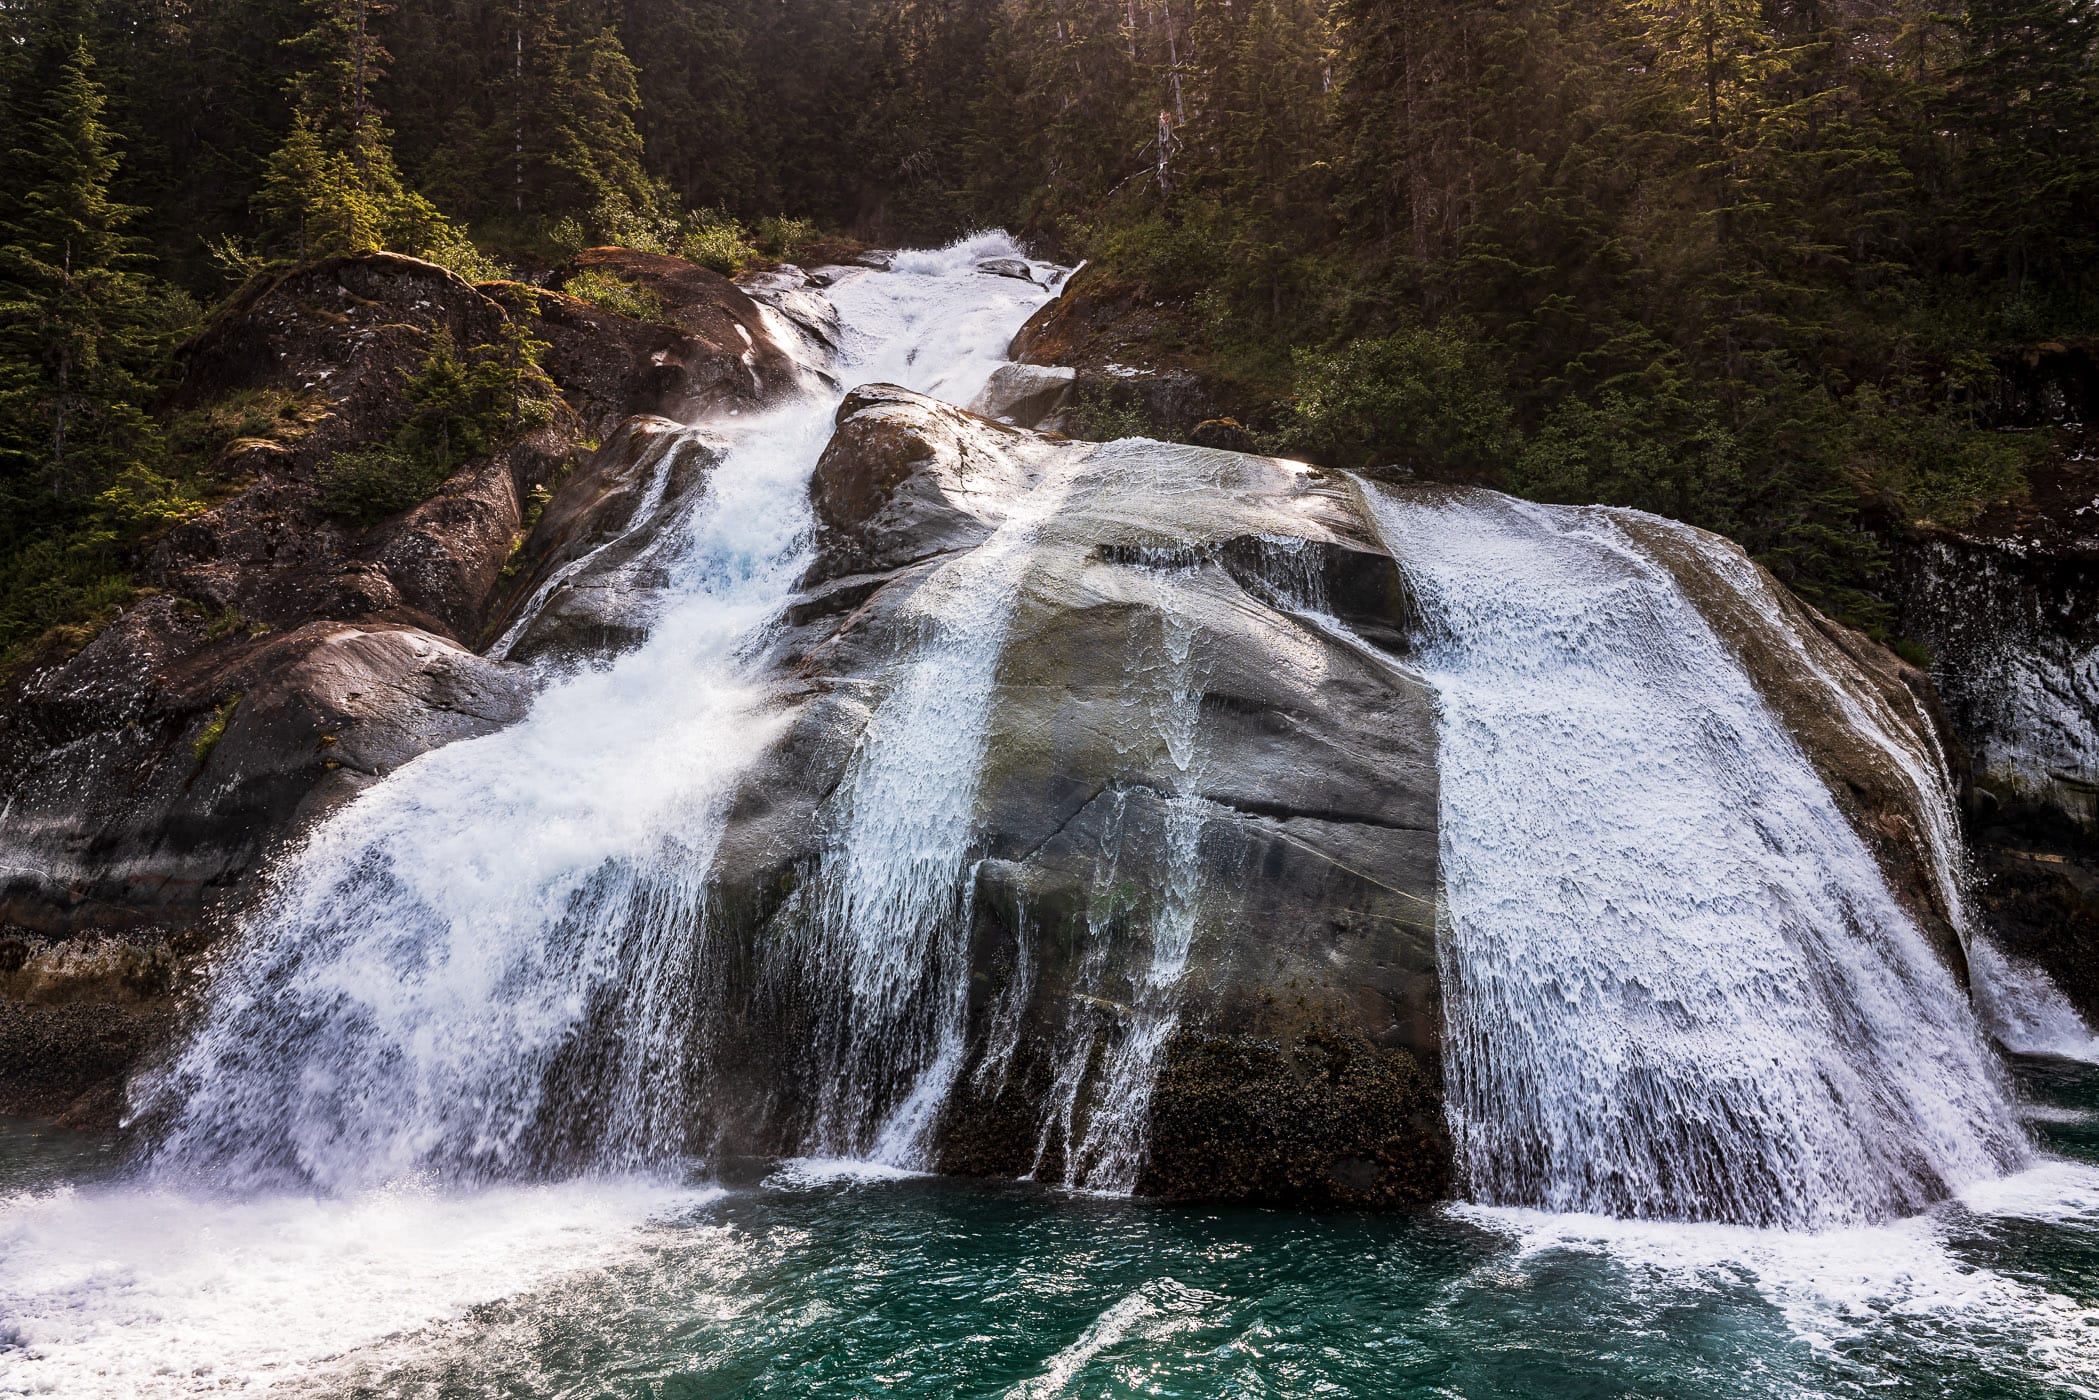 A waterfall emerges from the forest along the shore of Alaska's Tracy Arm Fjord.